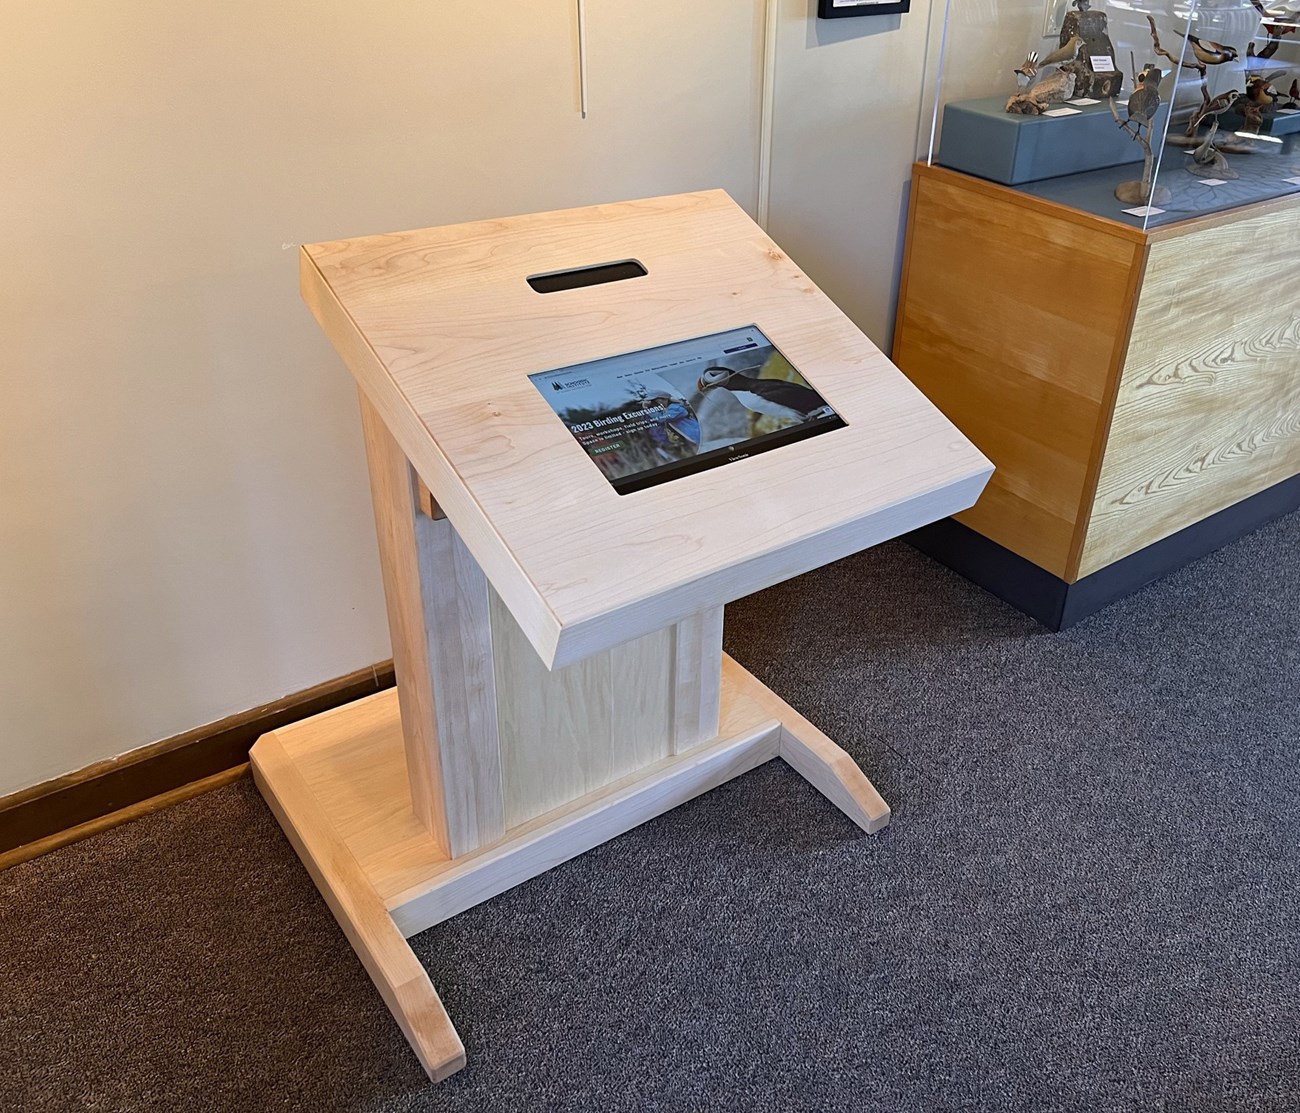 A wooden stand with an inset touch screen. The touch screen displays a program with a photo of a puffin and some text.